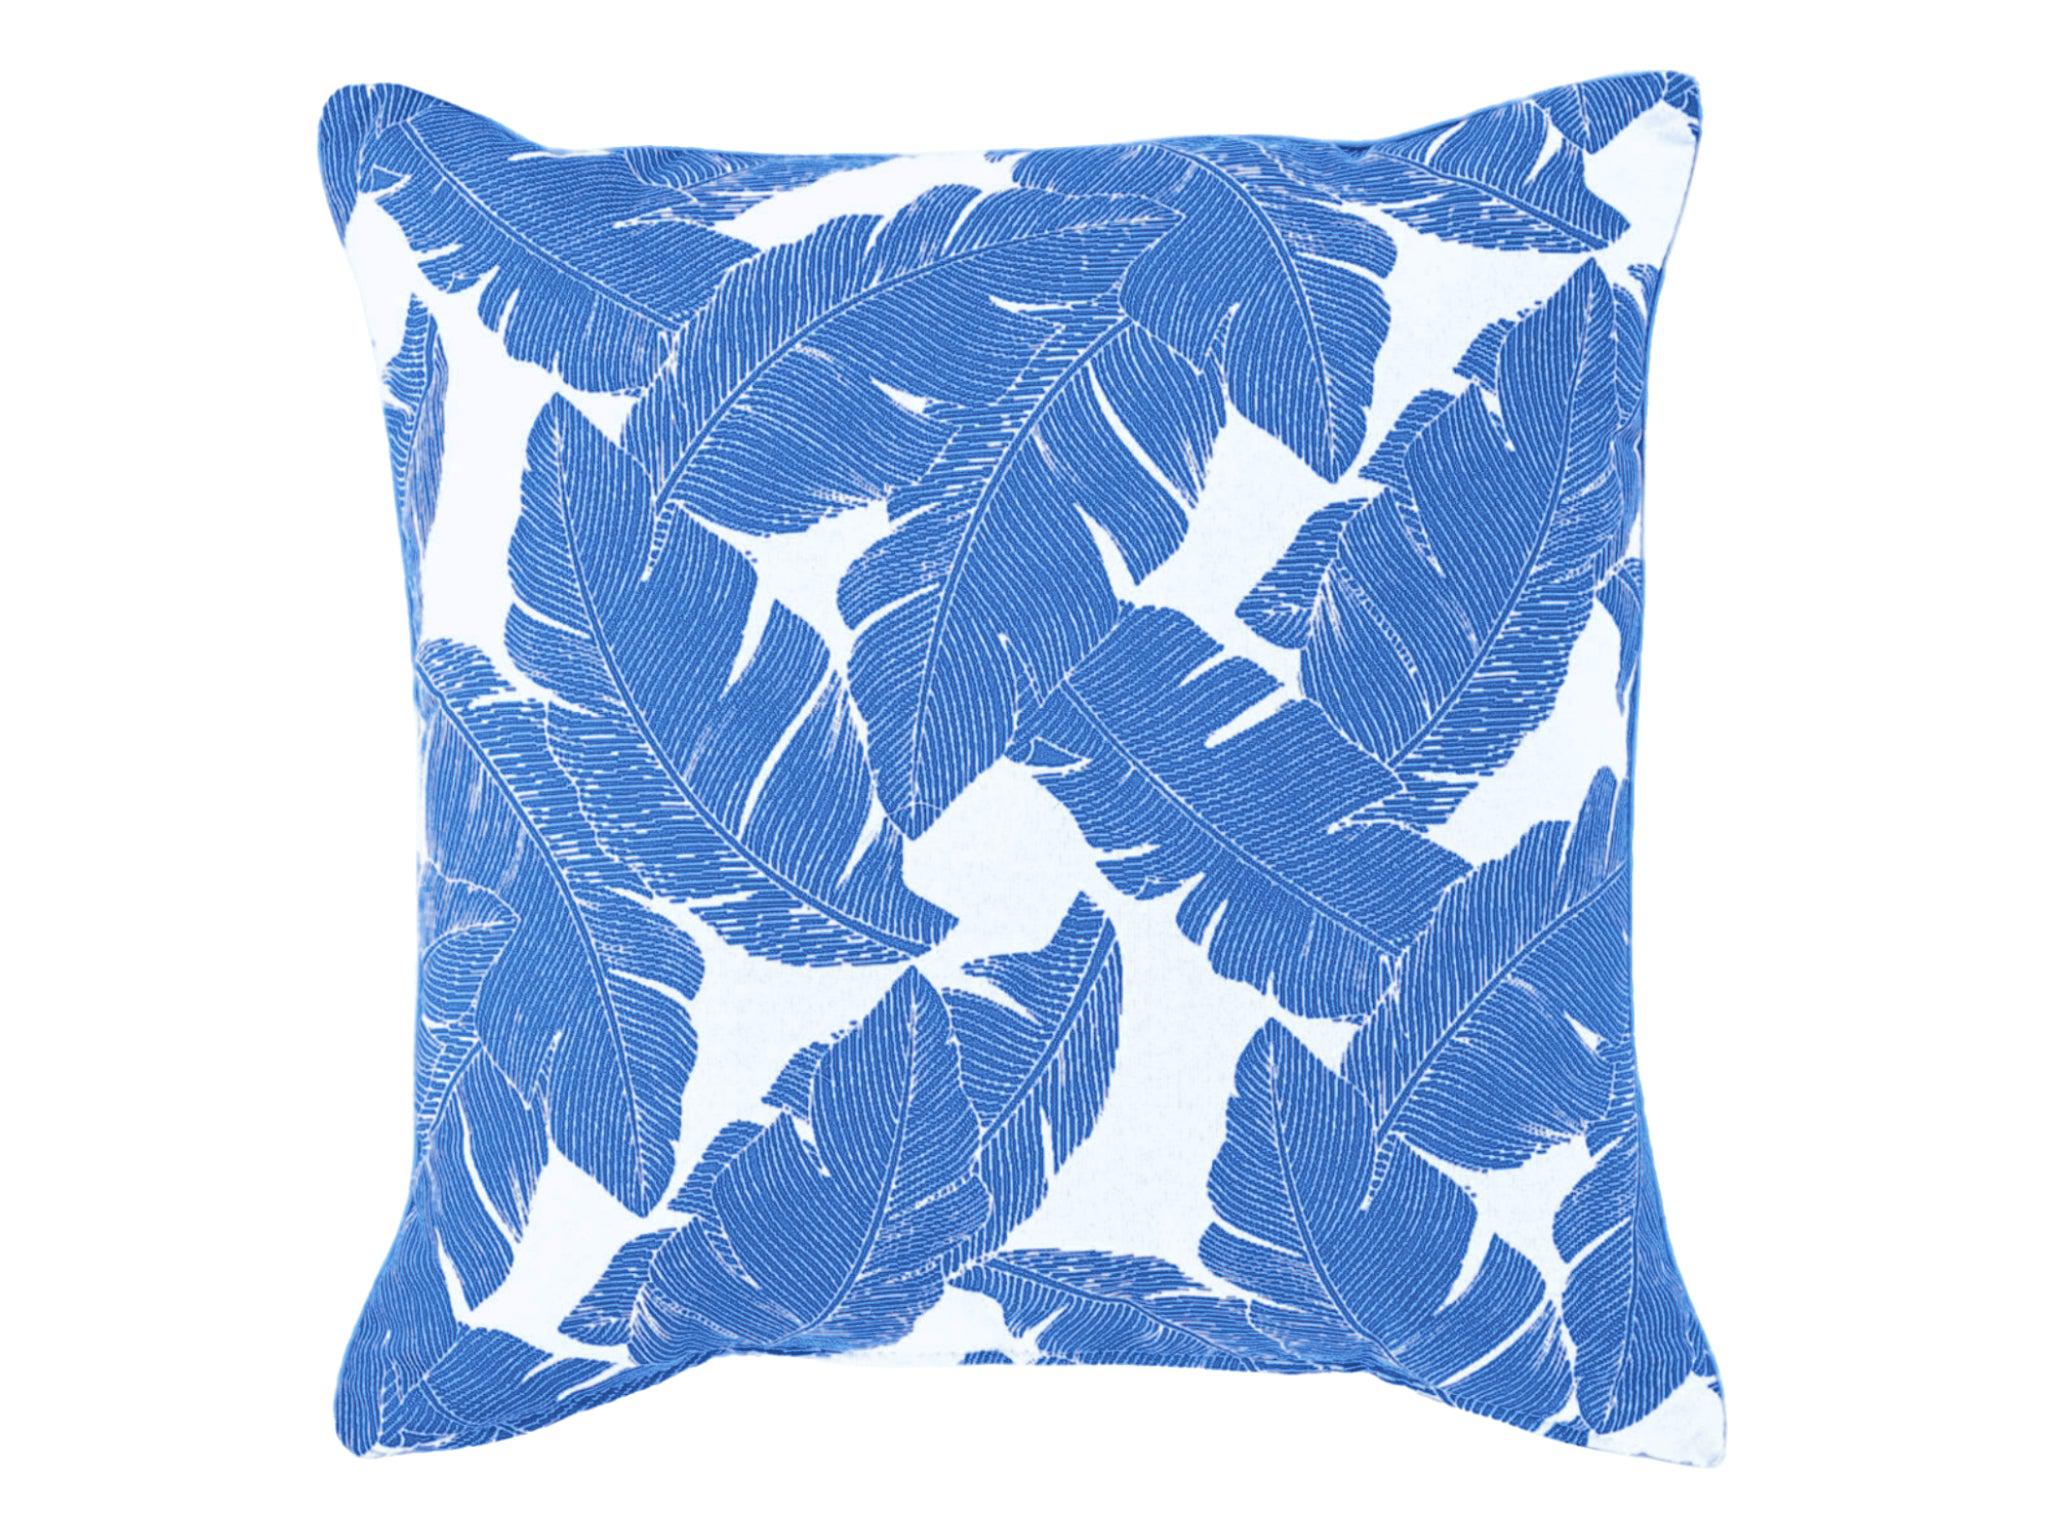 FurnitureOkay Embroidered Leaf Pattern Outdoor Cushion Cover